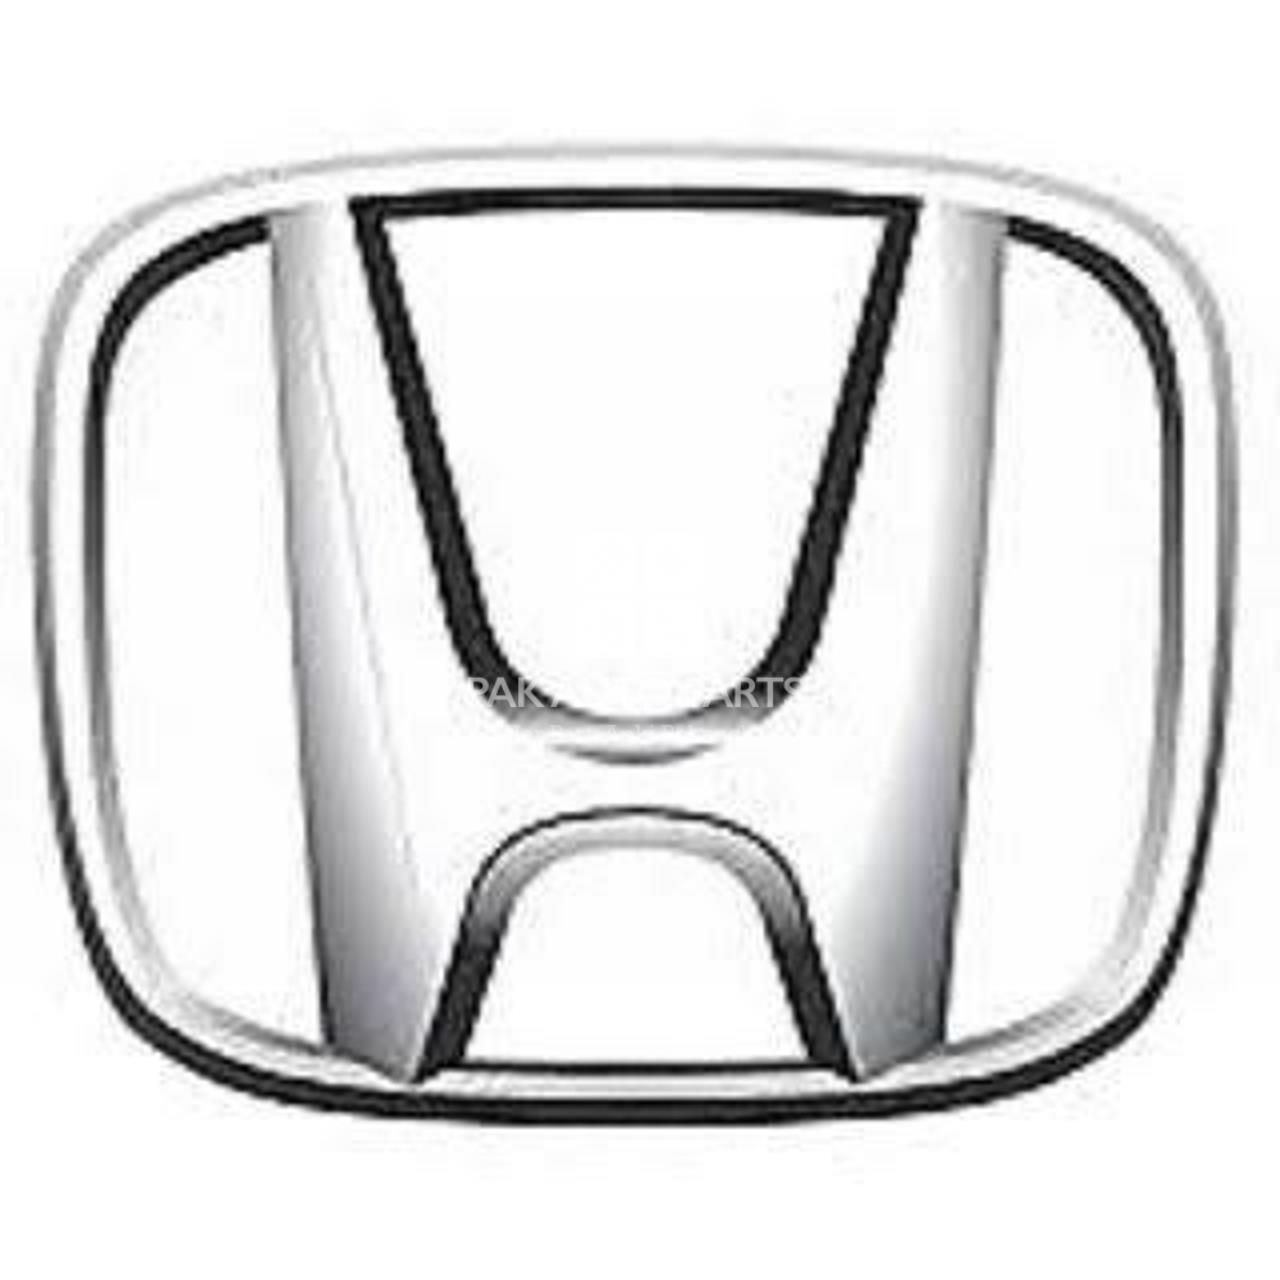 Picture of Honda Civic 2004-2005 front grill Monogram